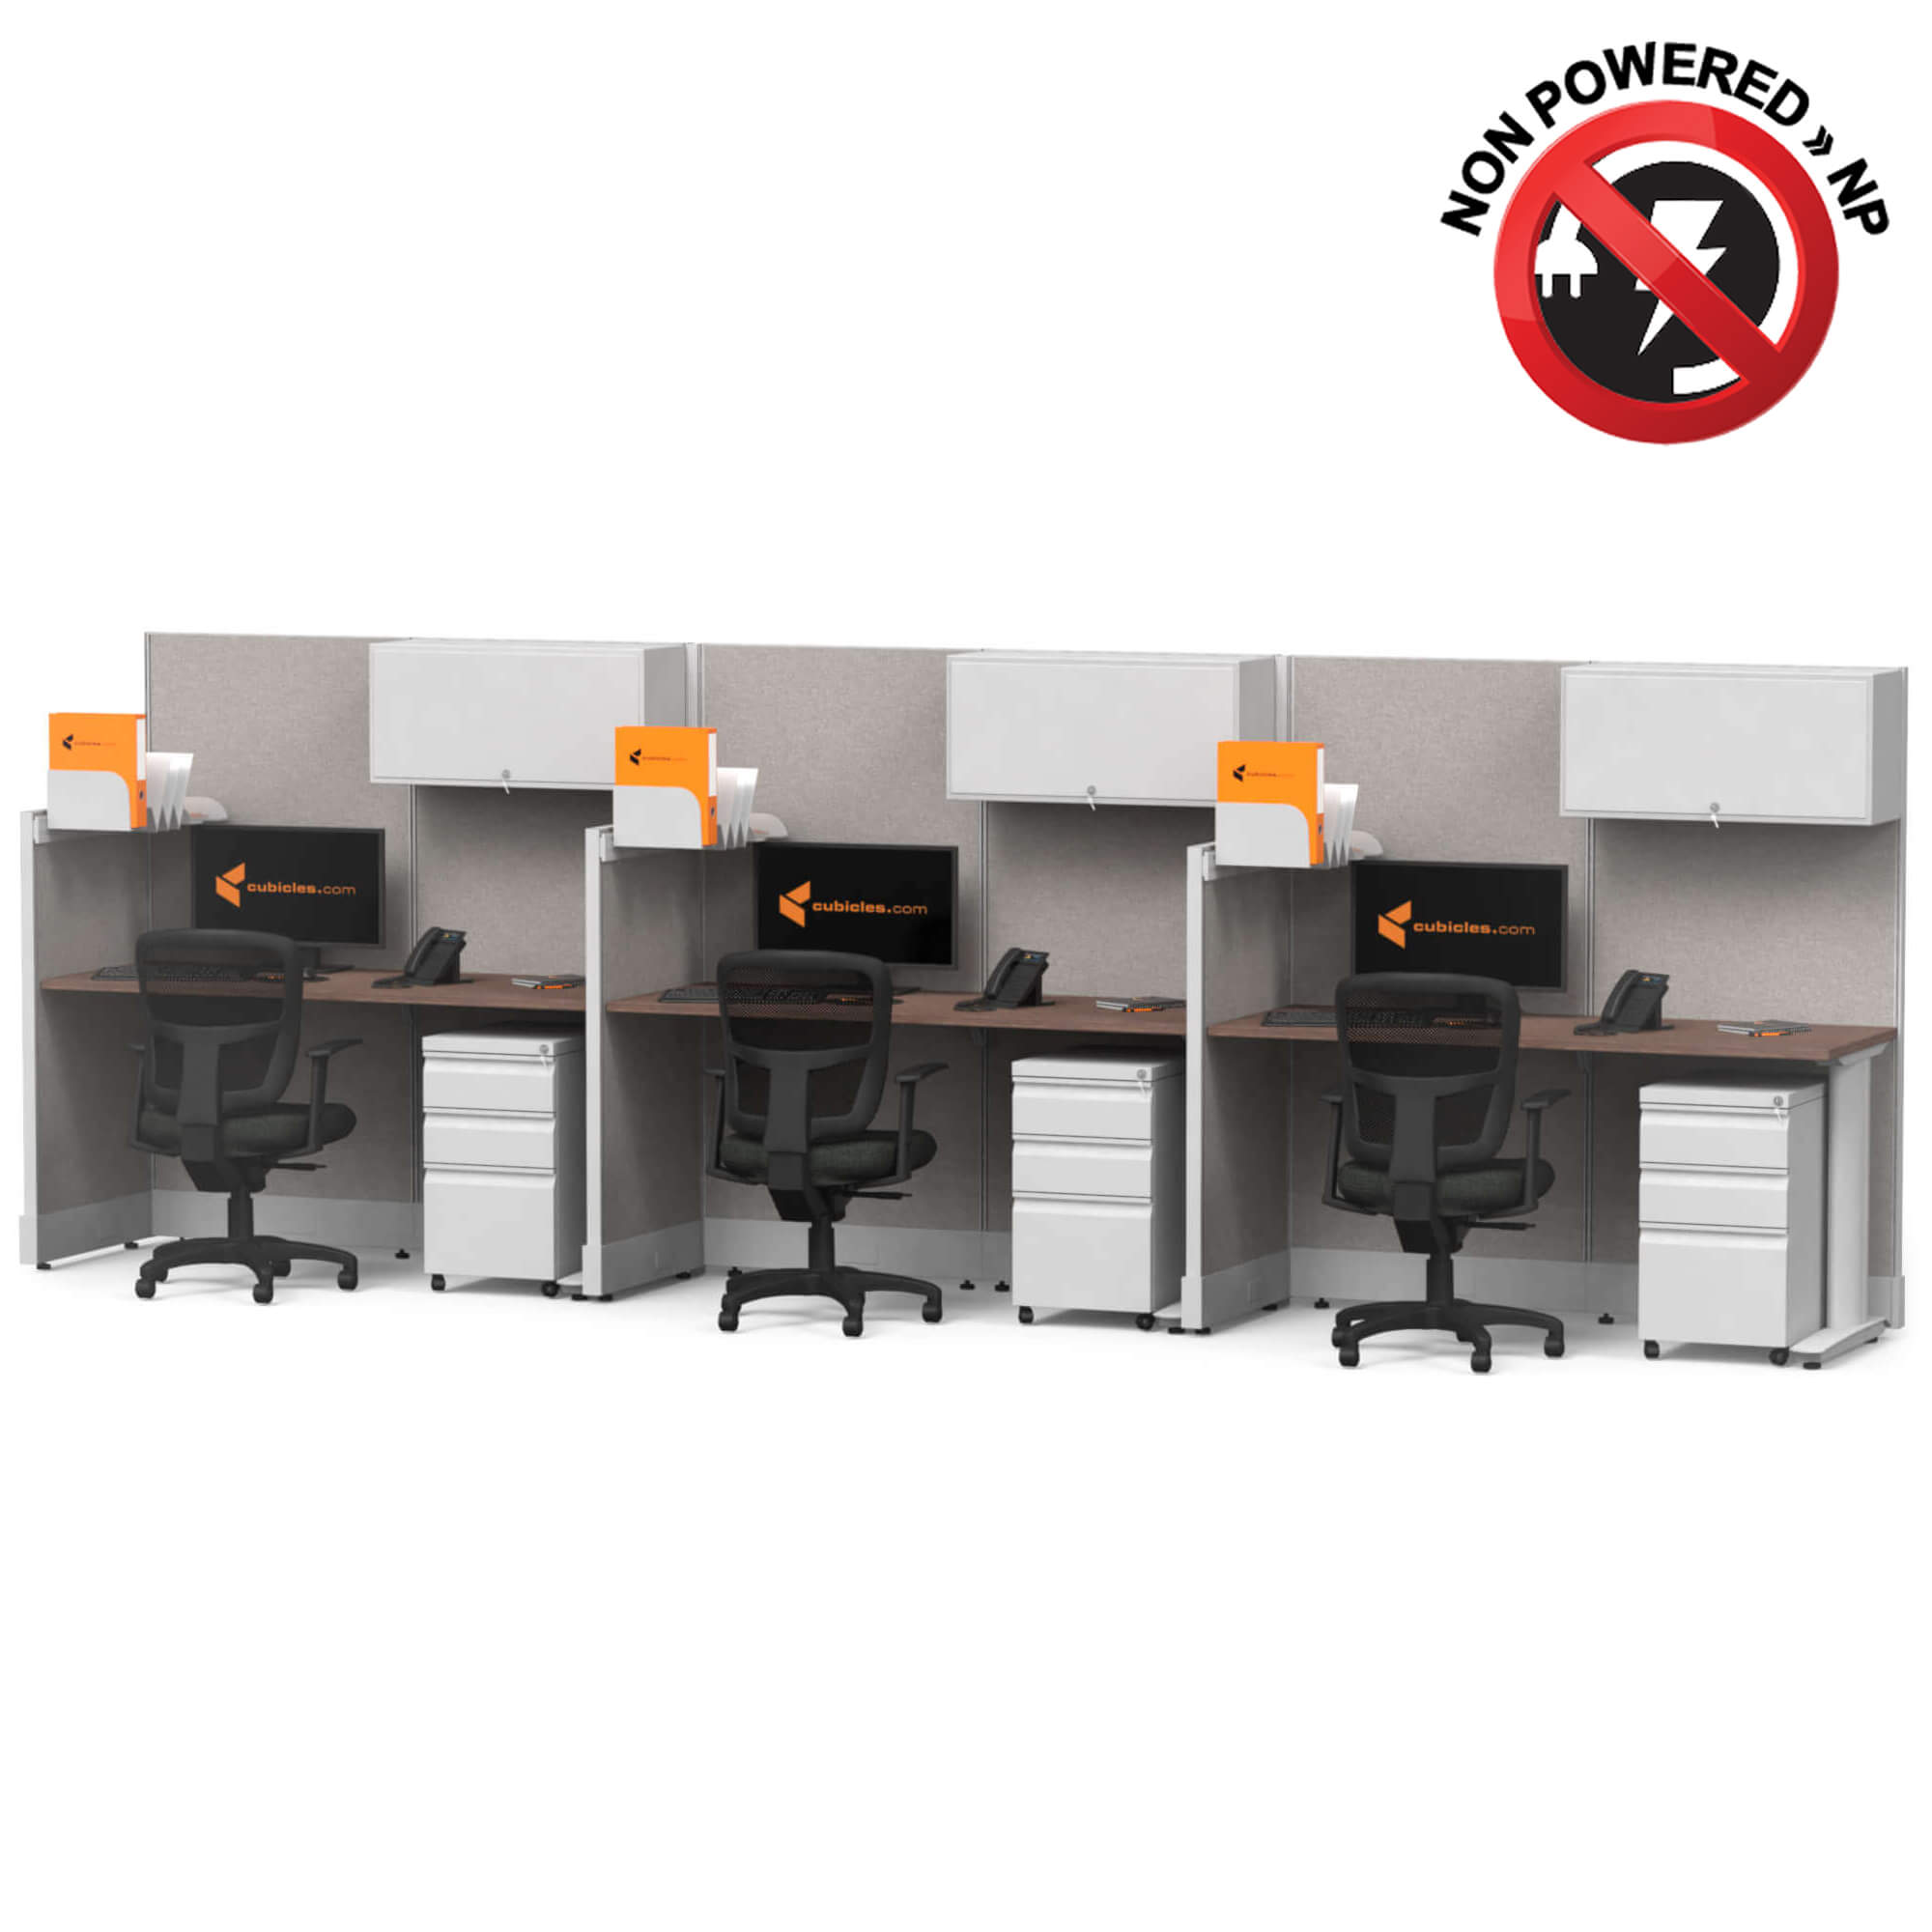 Cubicle desk straight with storage 3pack non powered